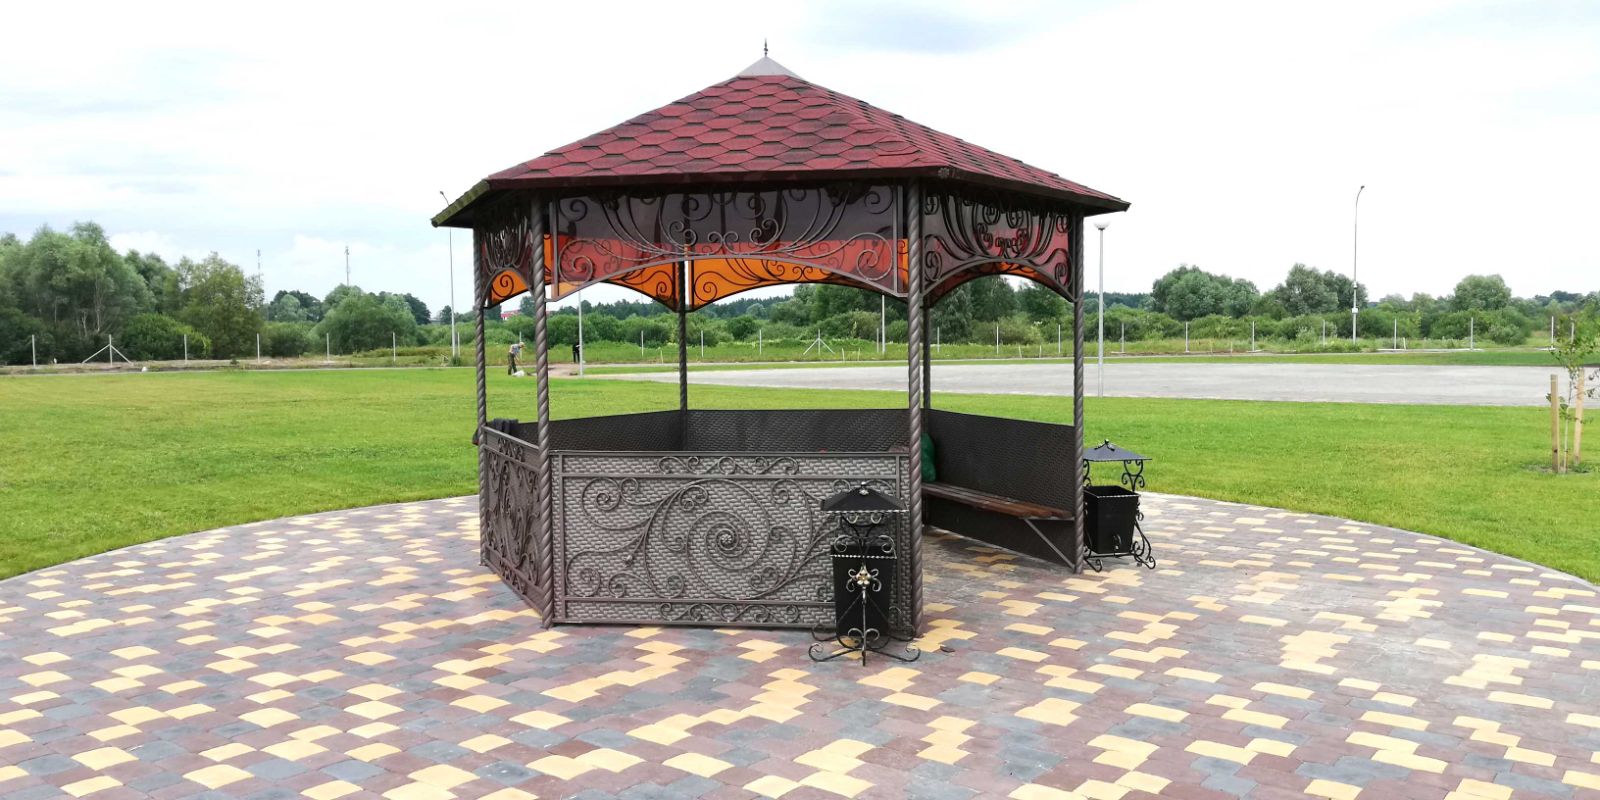 Forged gazebos of the BUPP "Artistic Products Factory" are located in different parts of the tourist complex